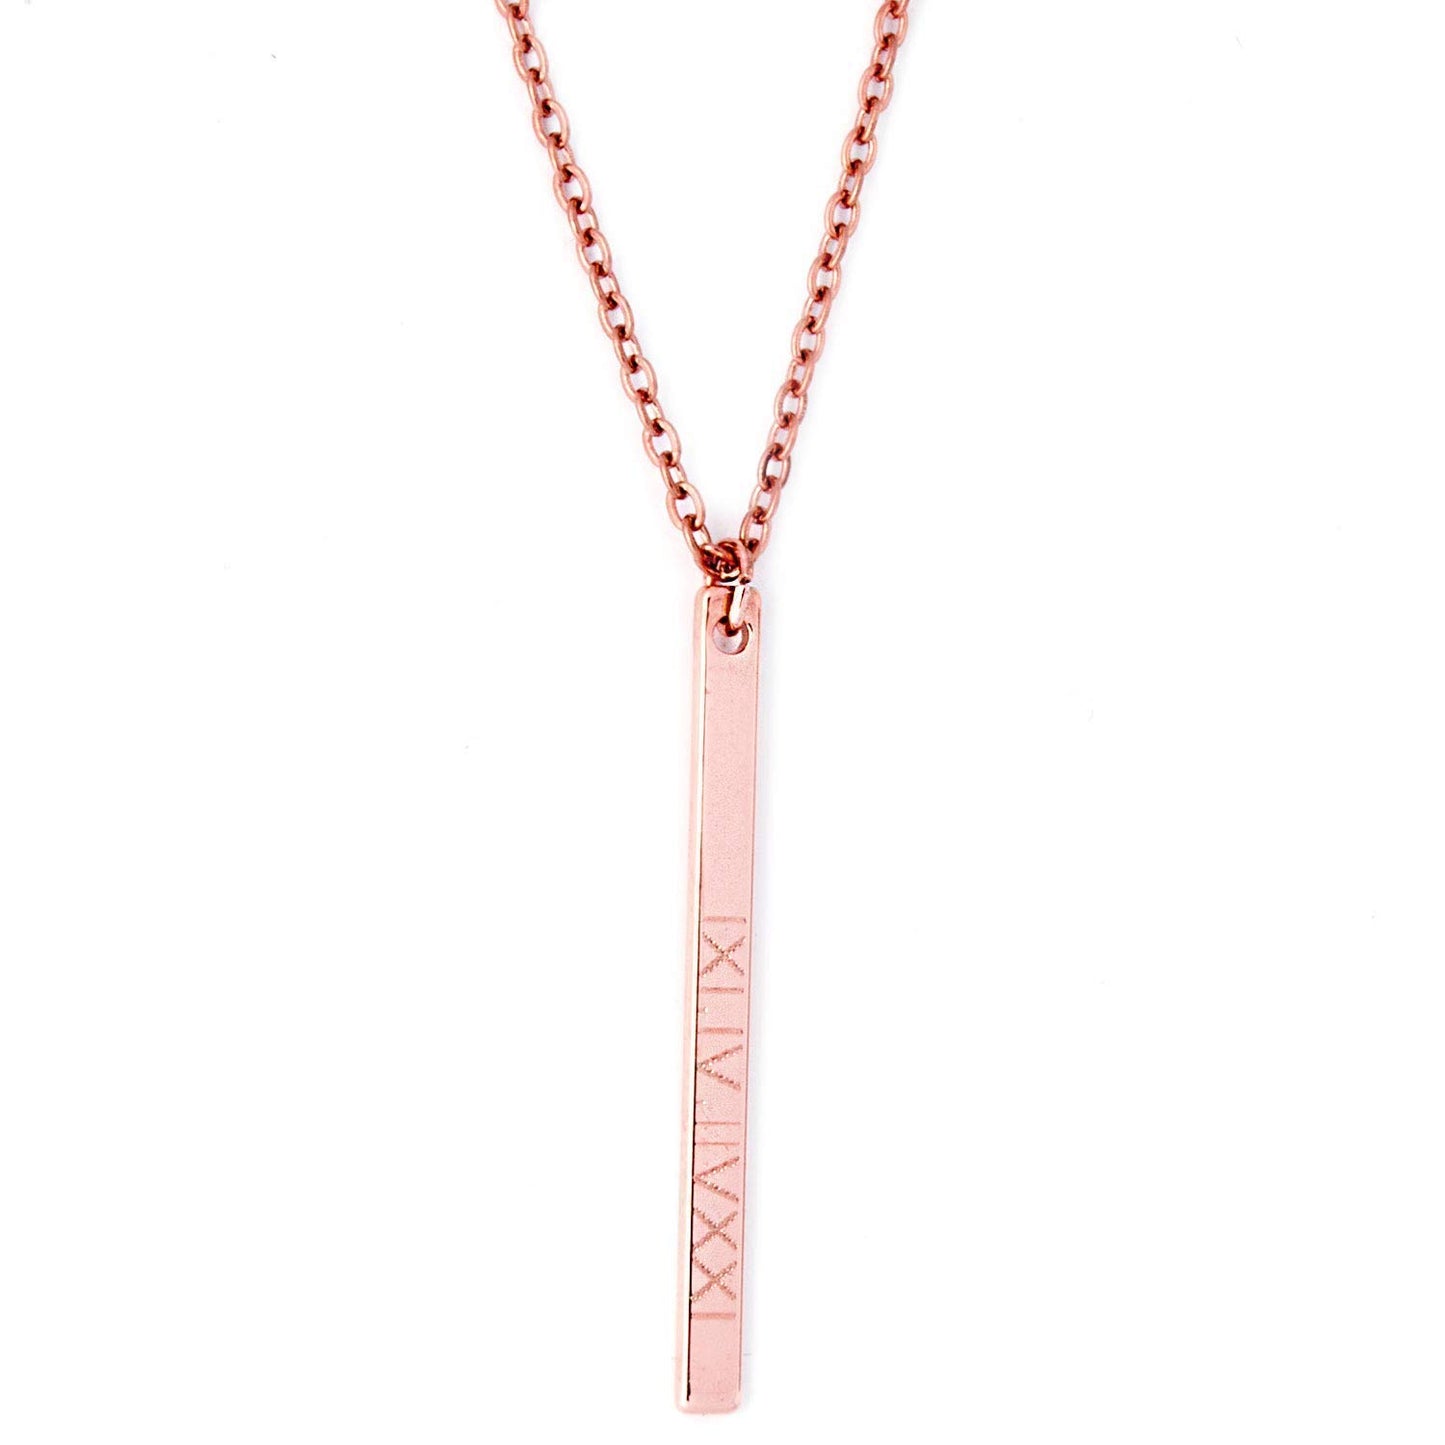 Personalized Toggle Necklace in Gold